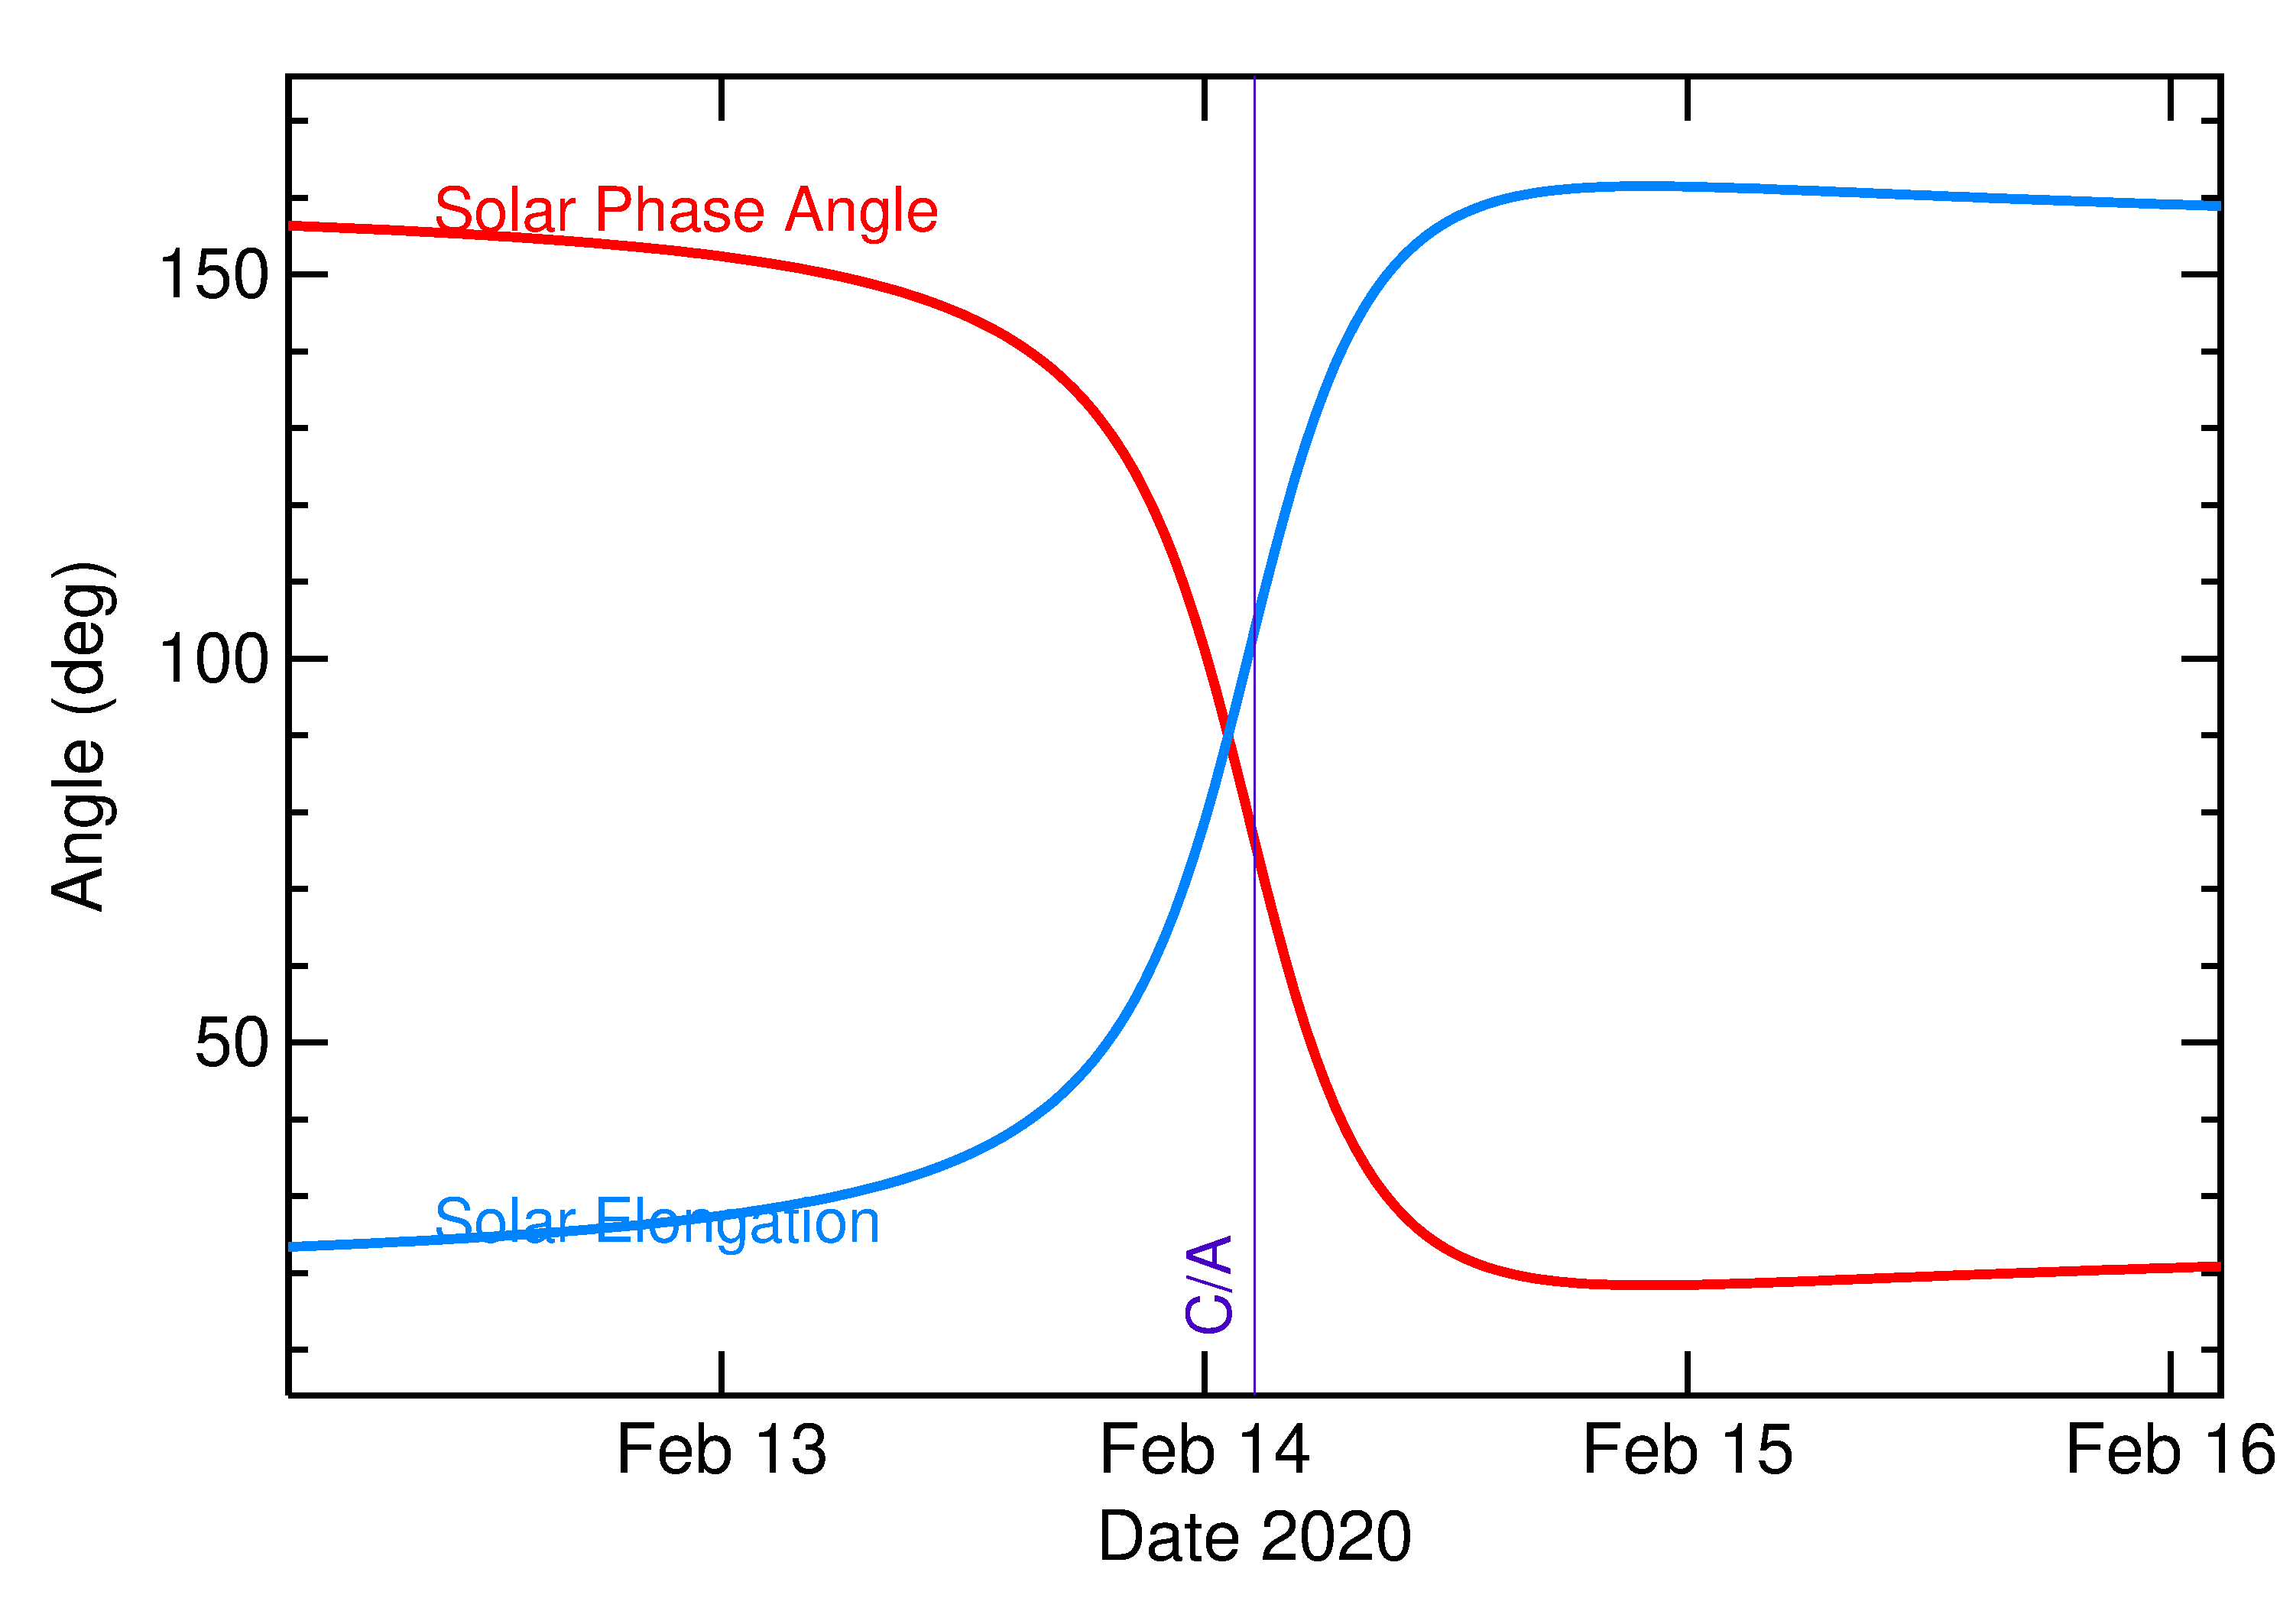 Solar Elongation and Solar Phase Angle of 2020 CQ2 in the days around closest approach